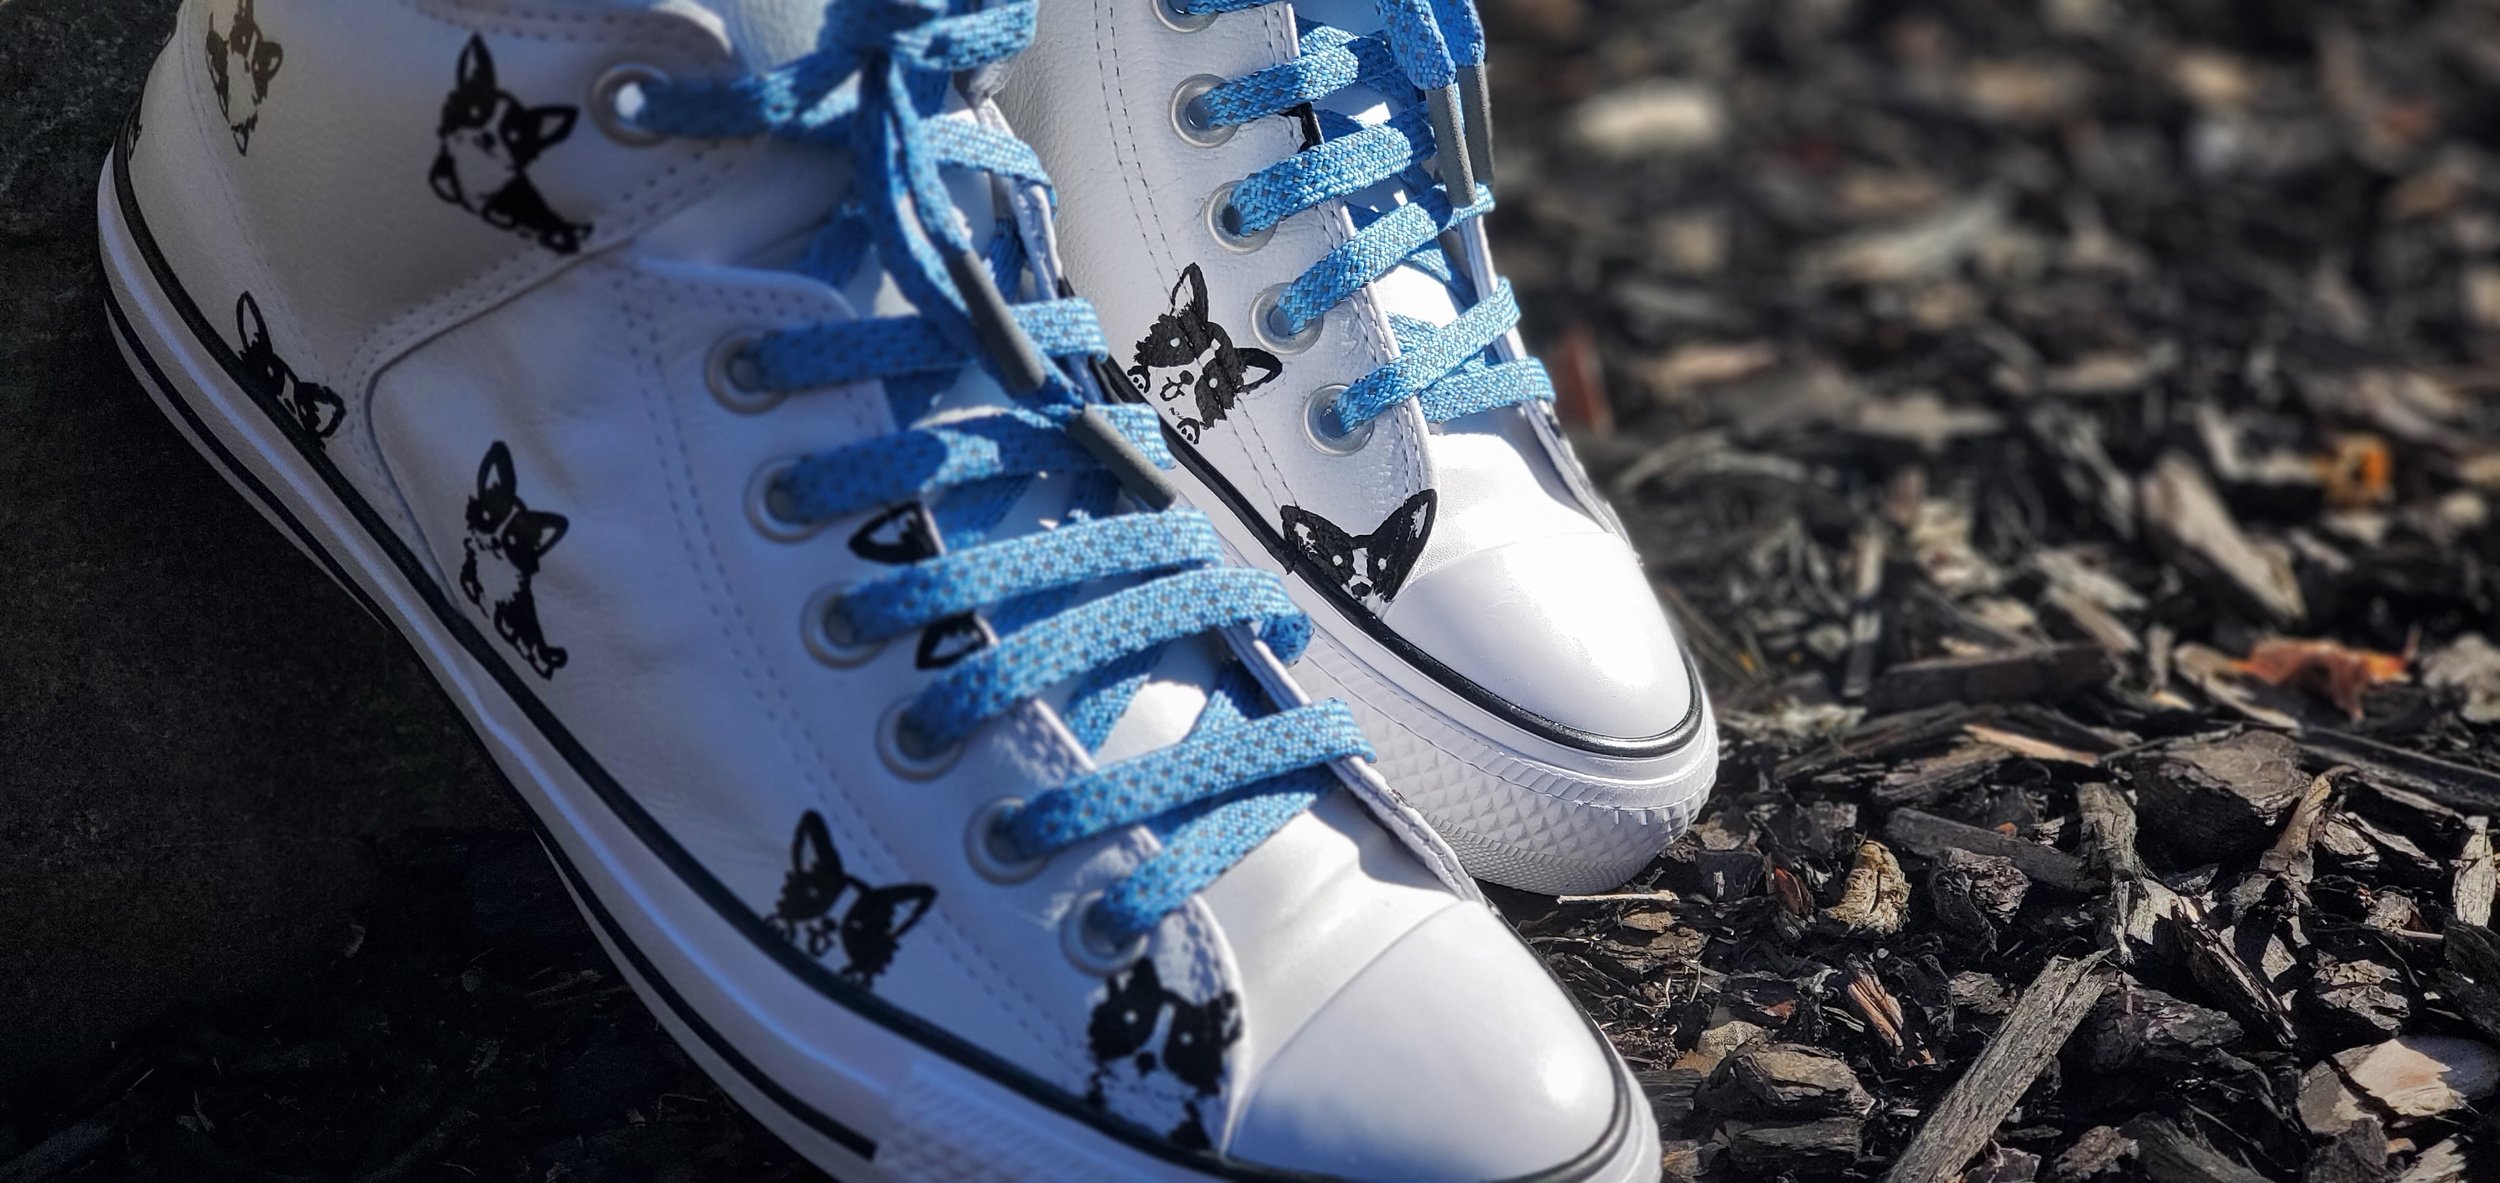  pattern: custom   shoes: converse leather high tops  laces:  reflective flat, carolina blue  aglets: reflective 